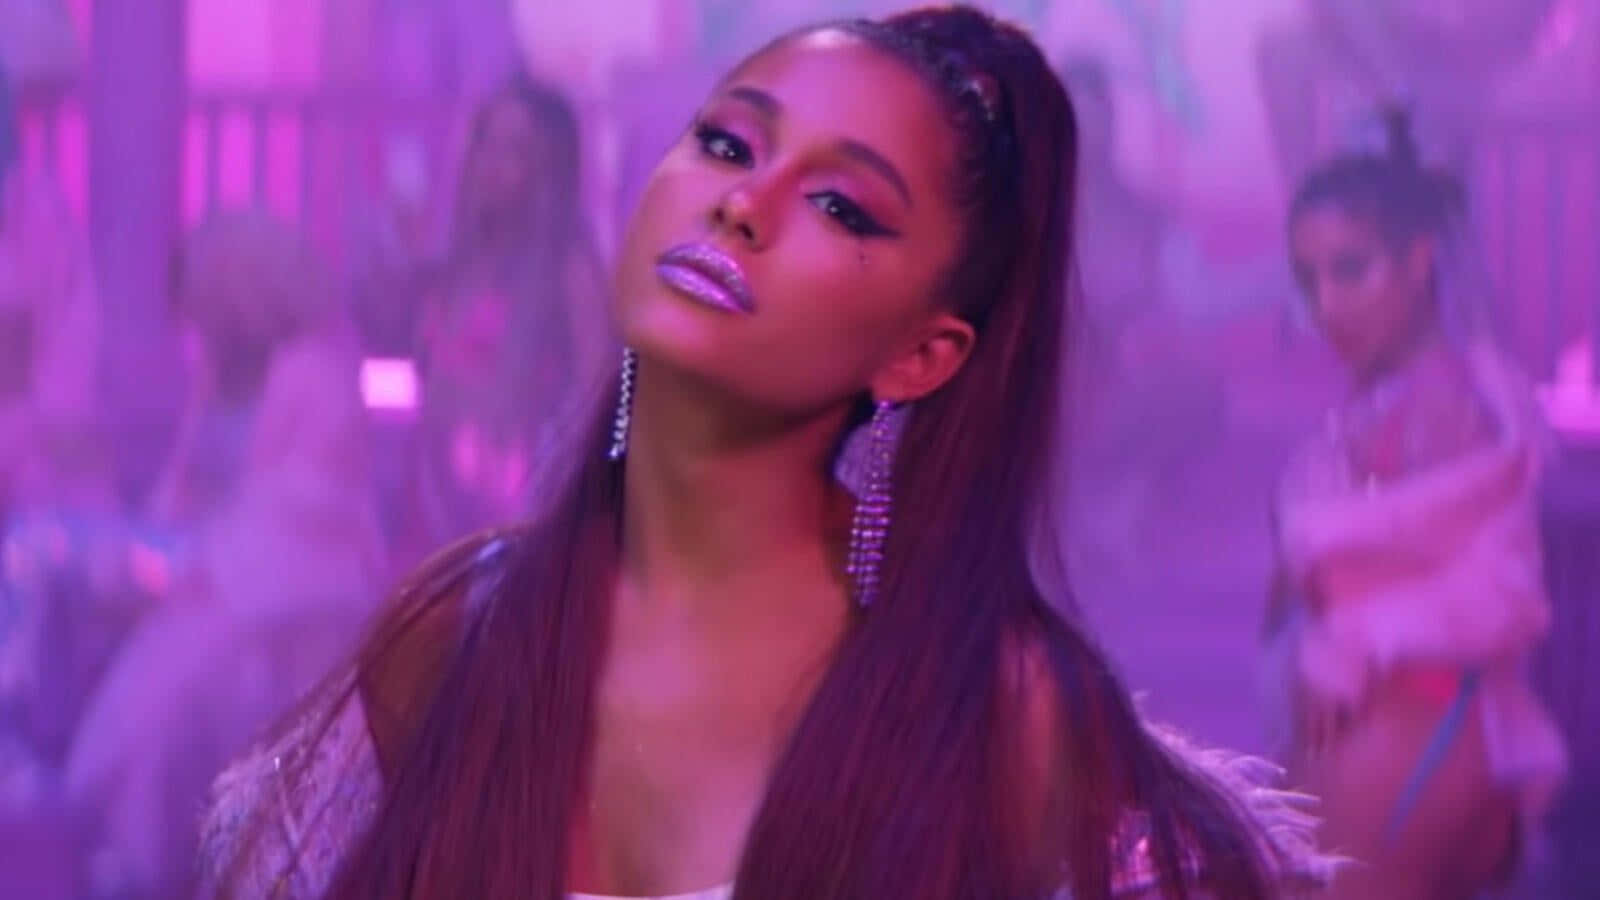 Celebrating success with Ariana Grande’s “7 Rings” Wallpaper